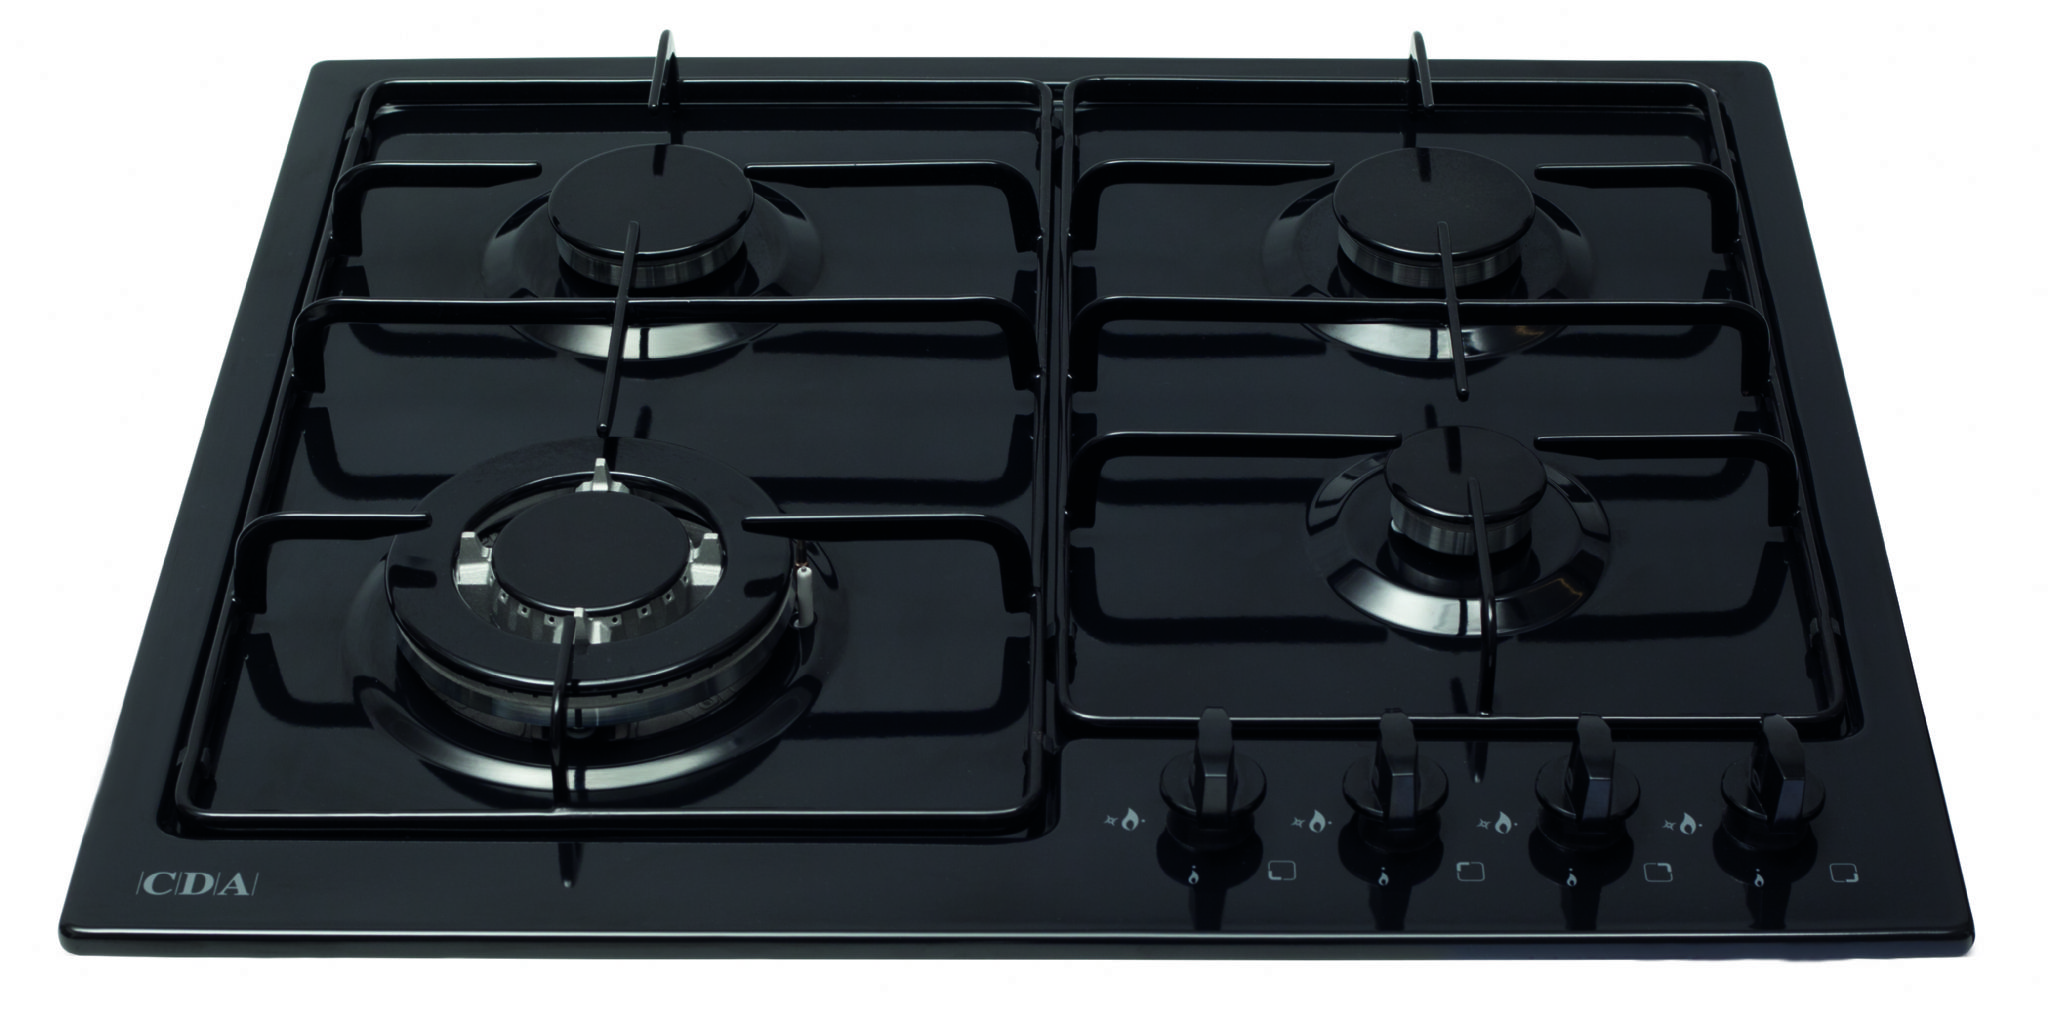 Cda HG6250 Four Burner Gas Hob with WOK Burner in Stainless Steel and Black